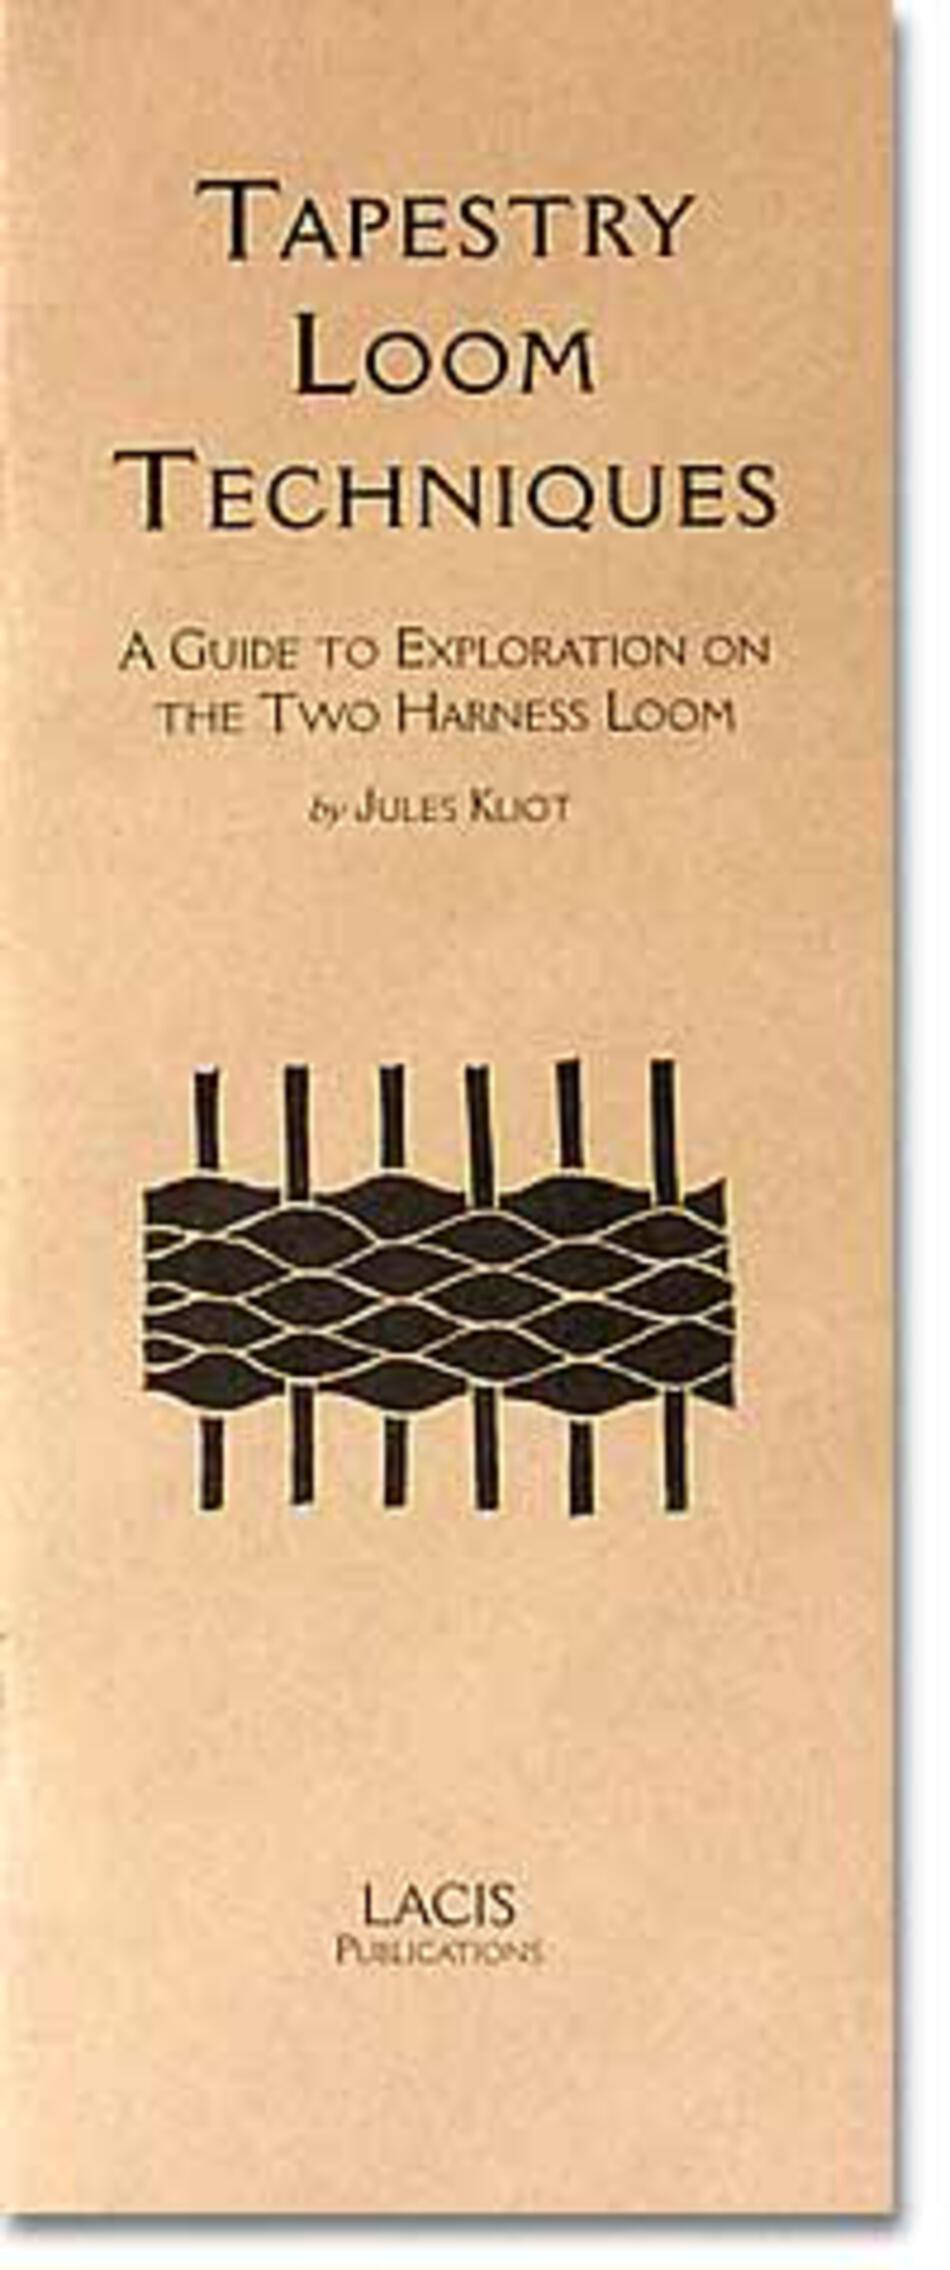 Weaving Books Tapestry Loom Techniques A Guide to Exploration on the TwoHarness Loom